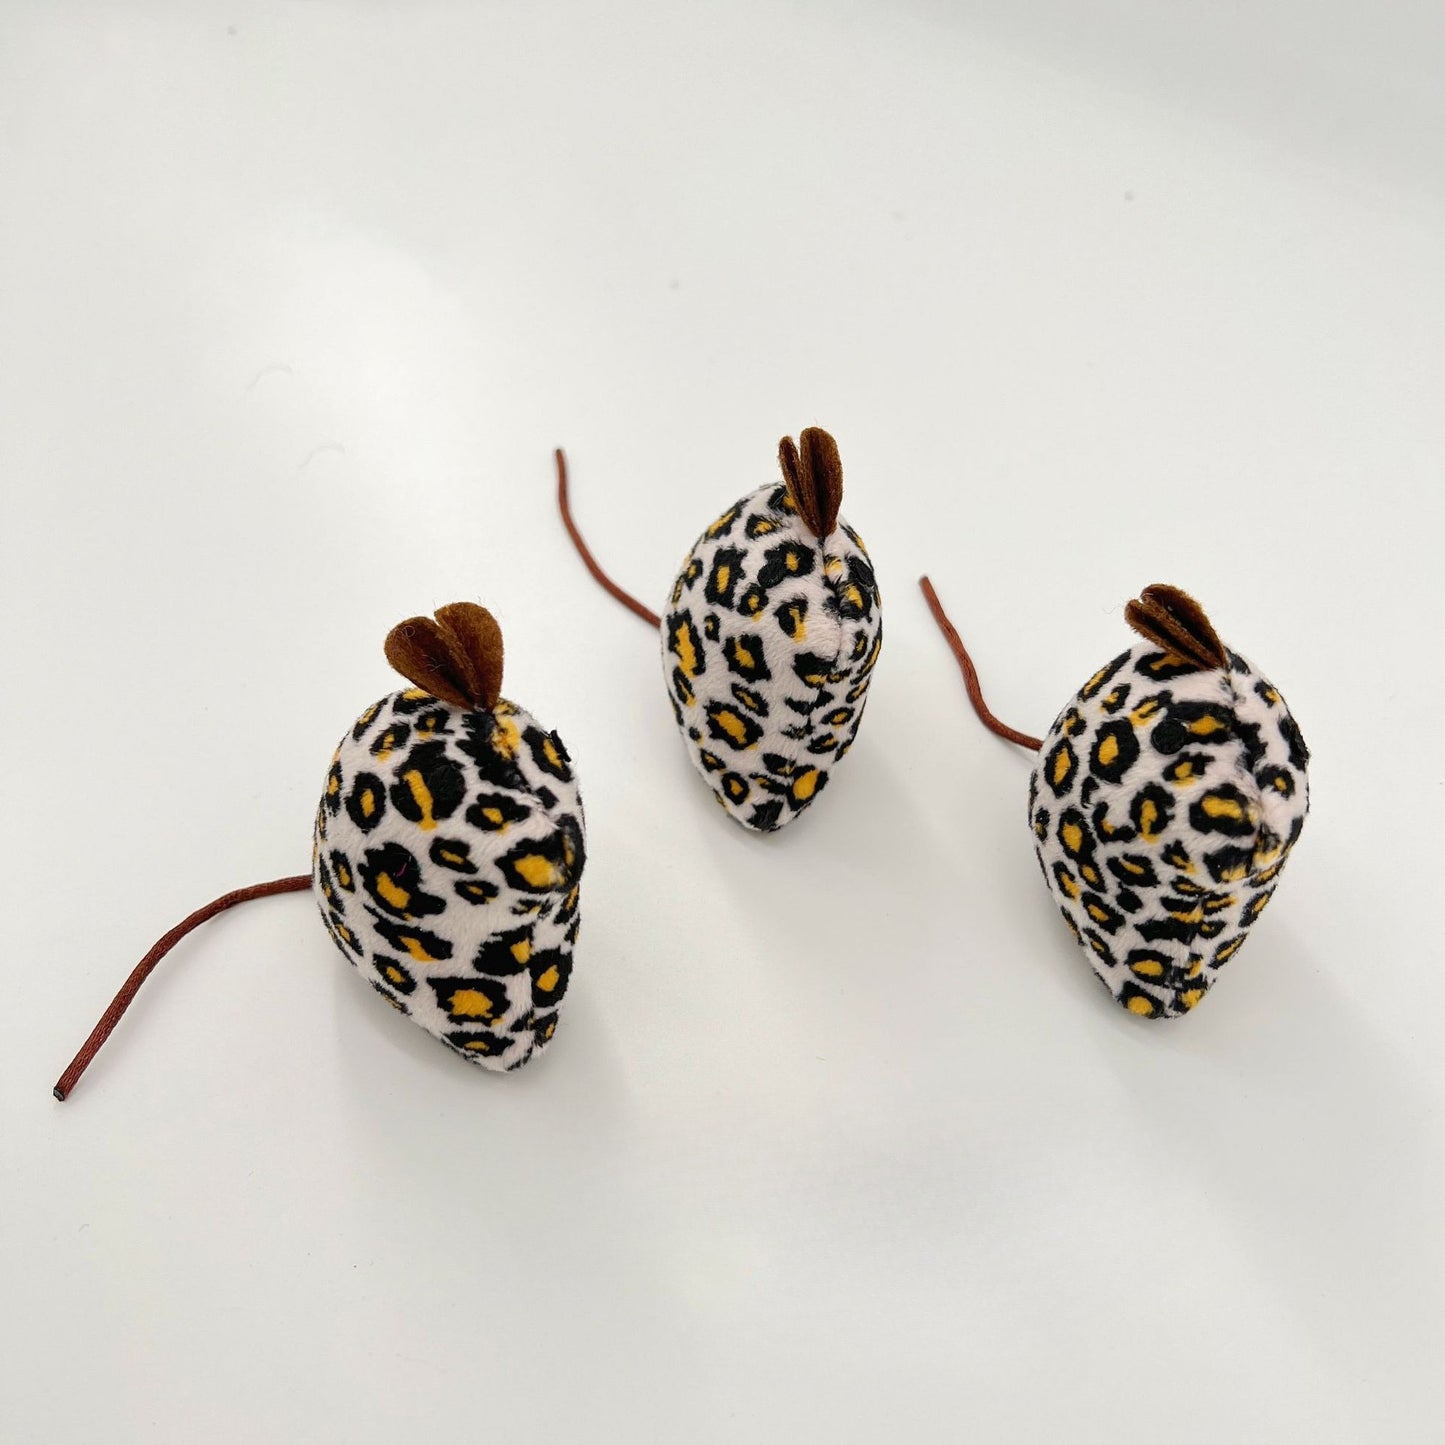 Moo - Leopard Print Mouse Cat Toys